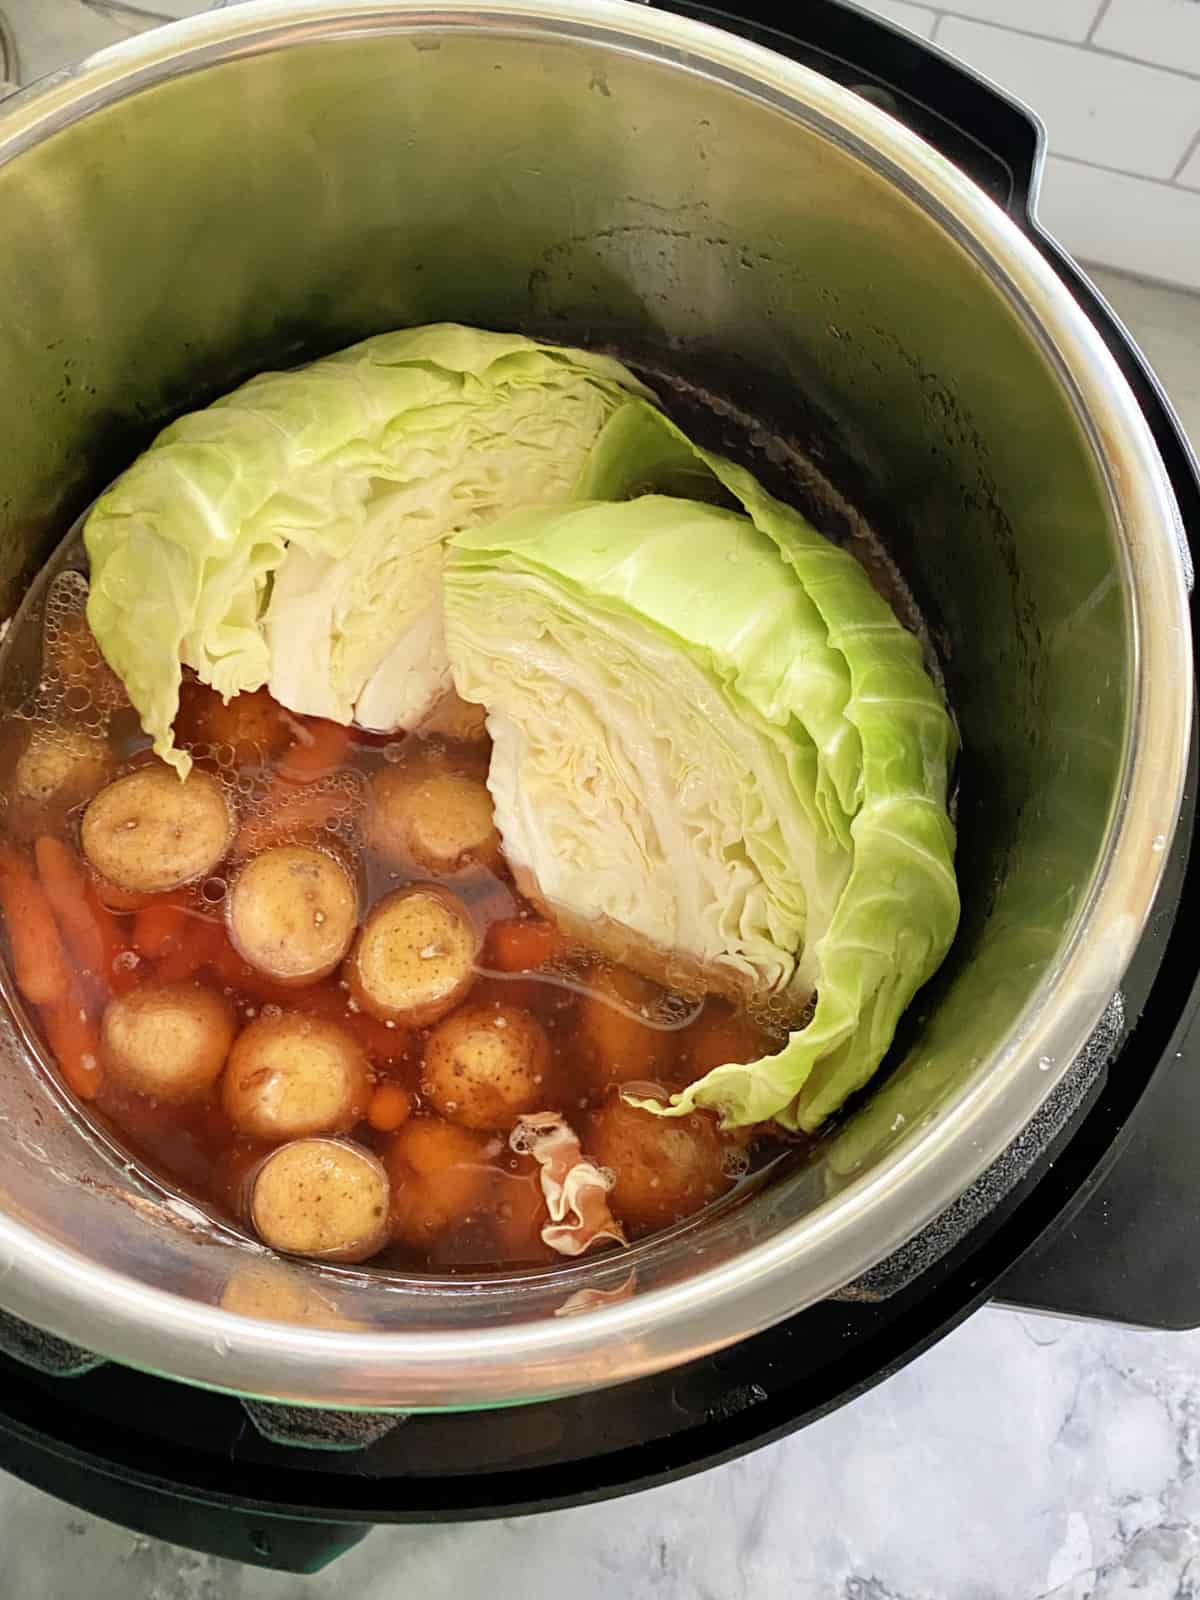 Top view of a quartered cabbage and cooked potatoes and baby carrots in an Instant Pot.